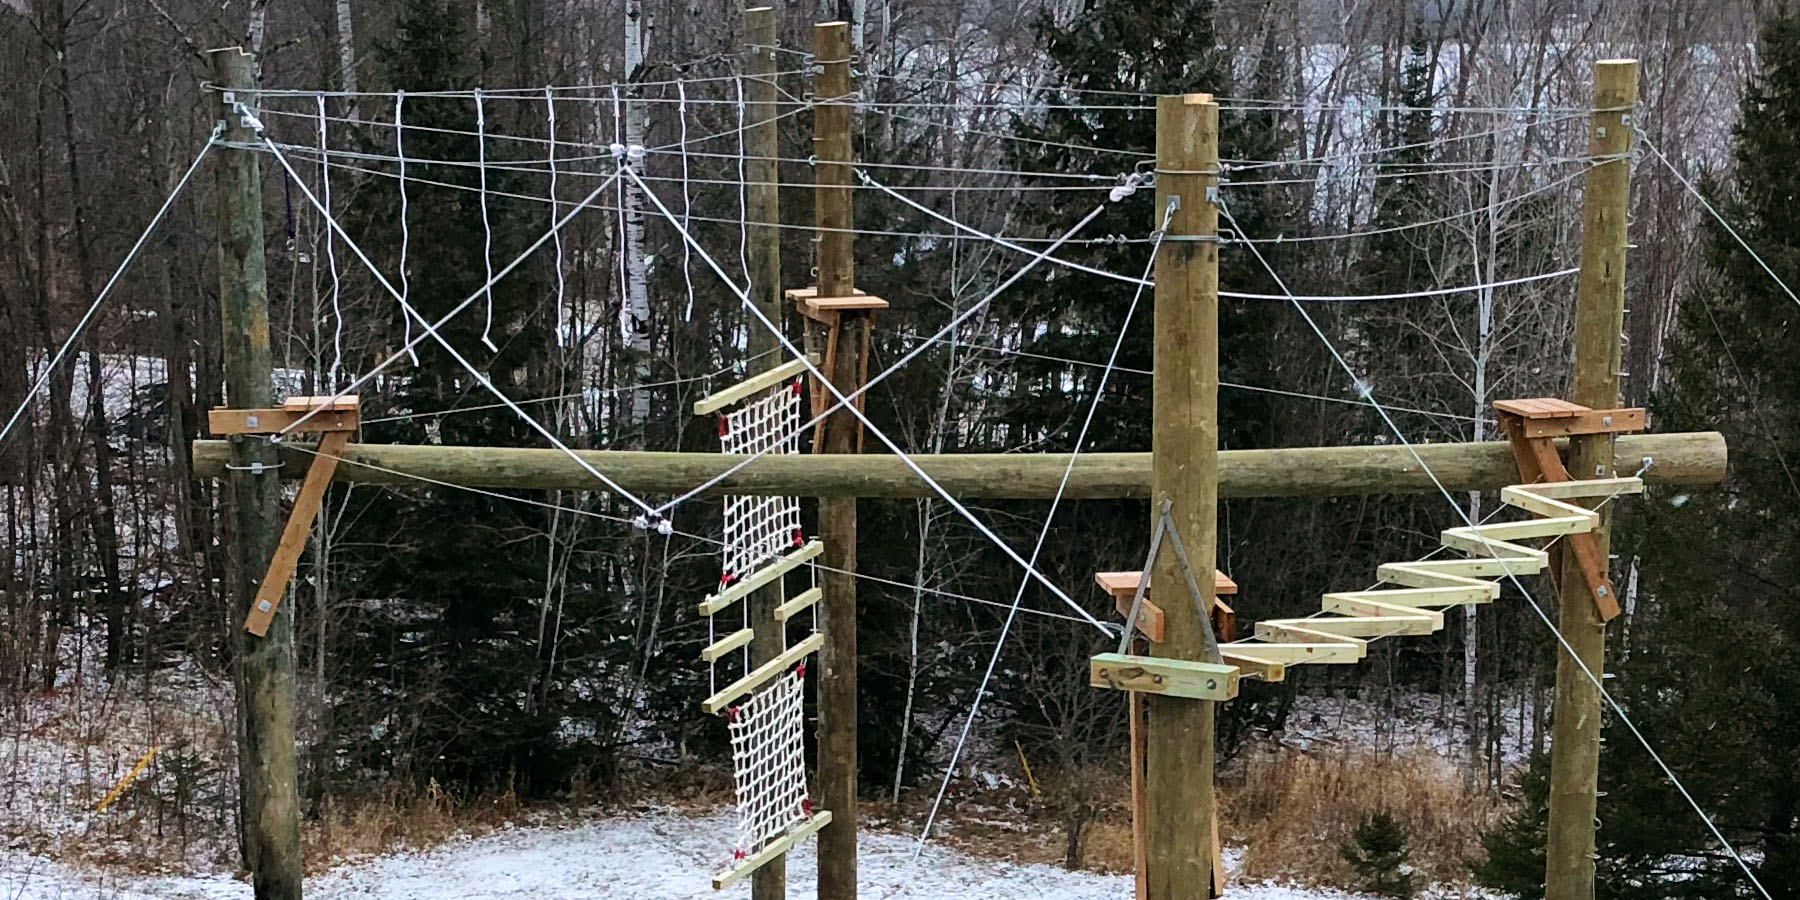 Challenge course with high and low elements designed and built by ABEE Inc. in the woods.